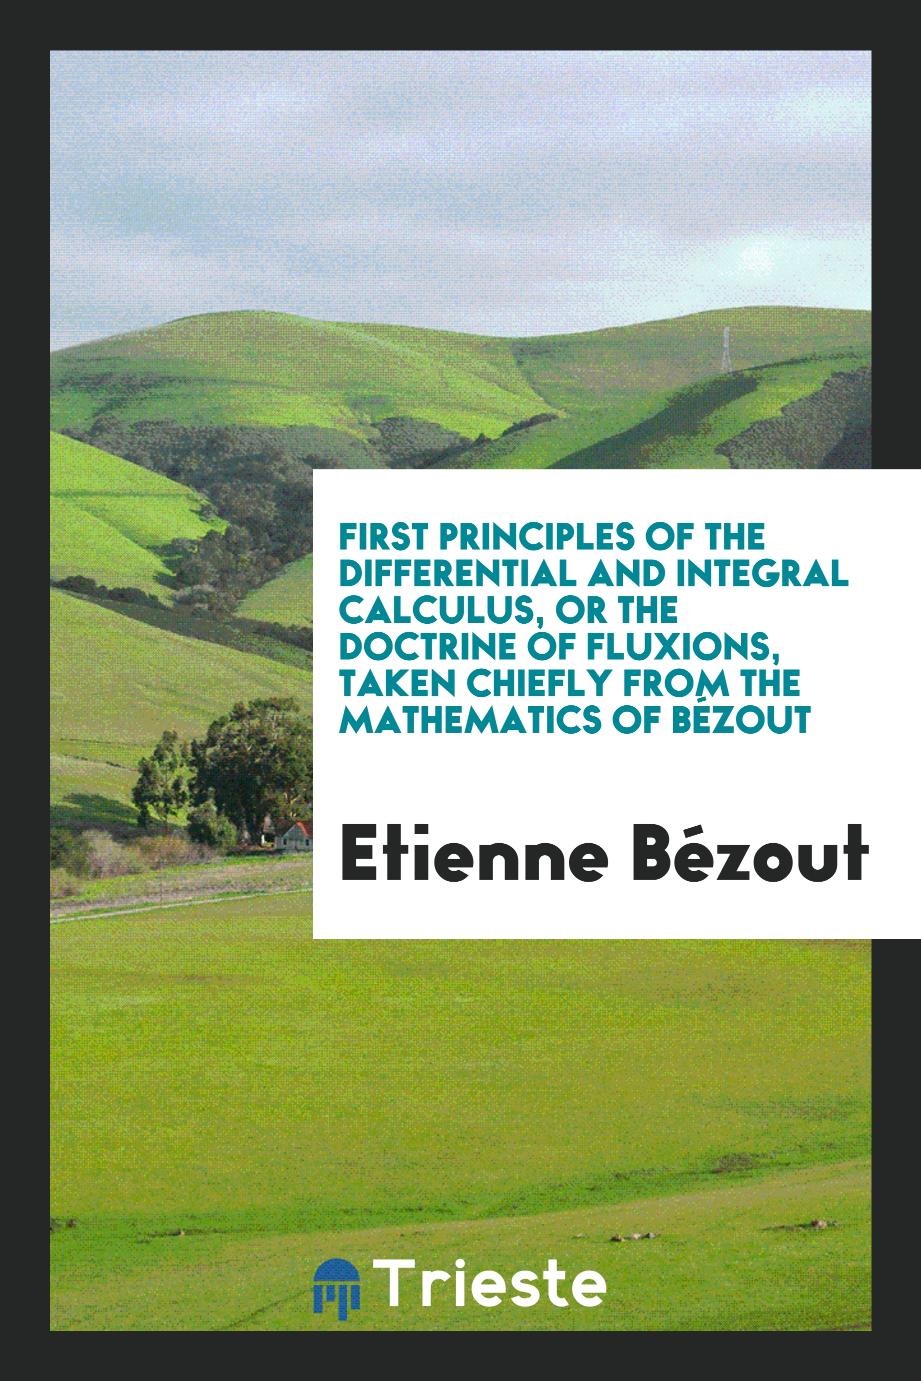 First Principles of the Differential and Integral Calculus, or the Doctrine of Fluxions, Taken Chiefly from the Mathematics of Bézout